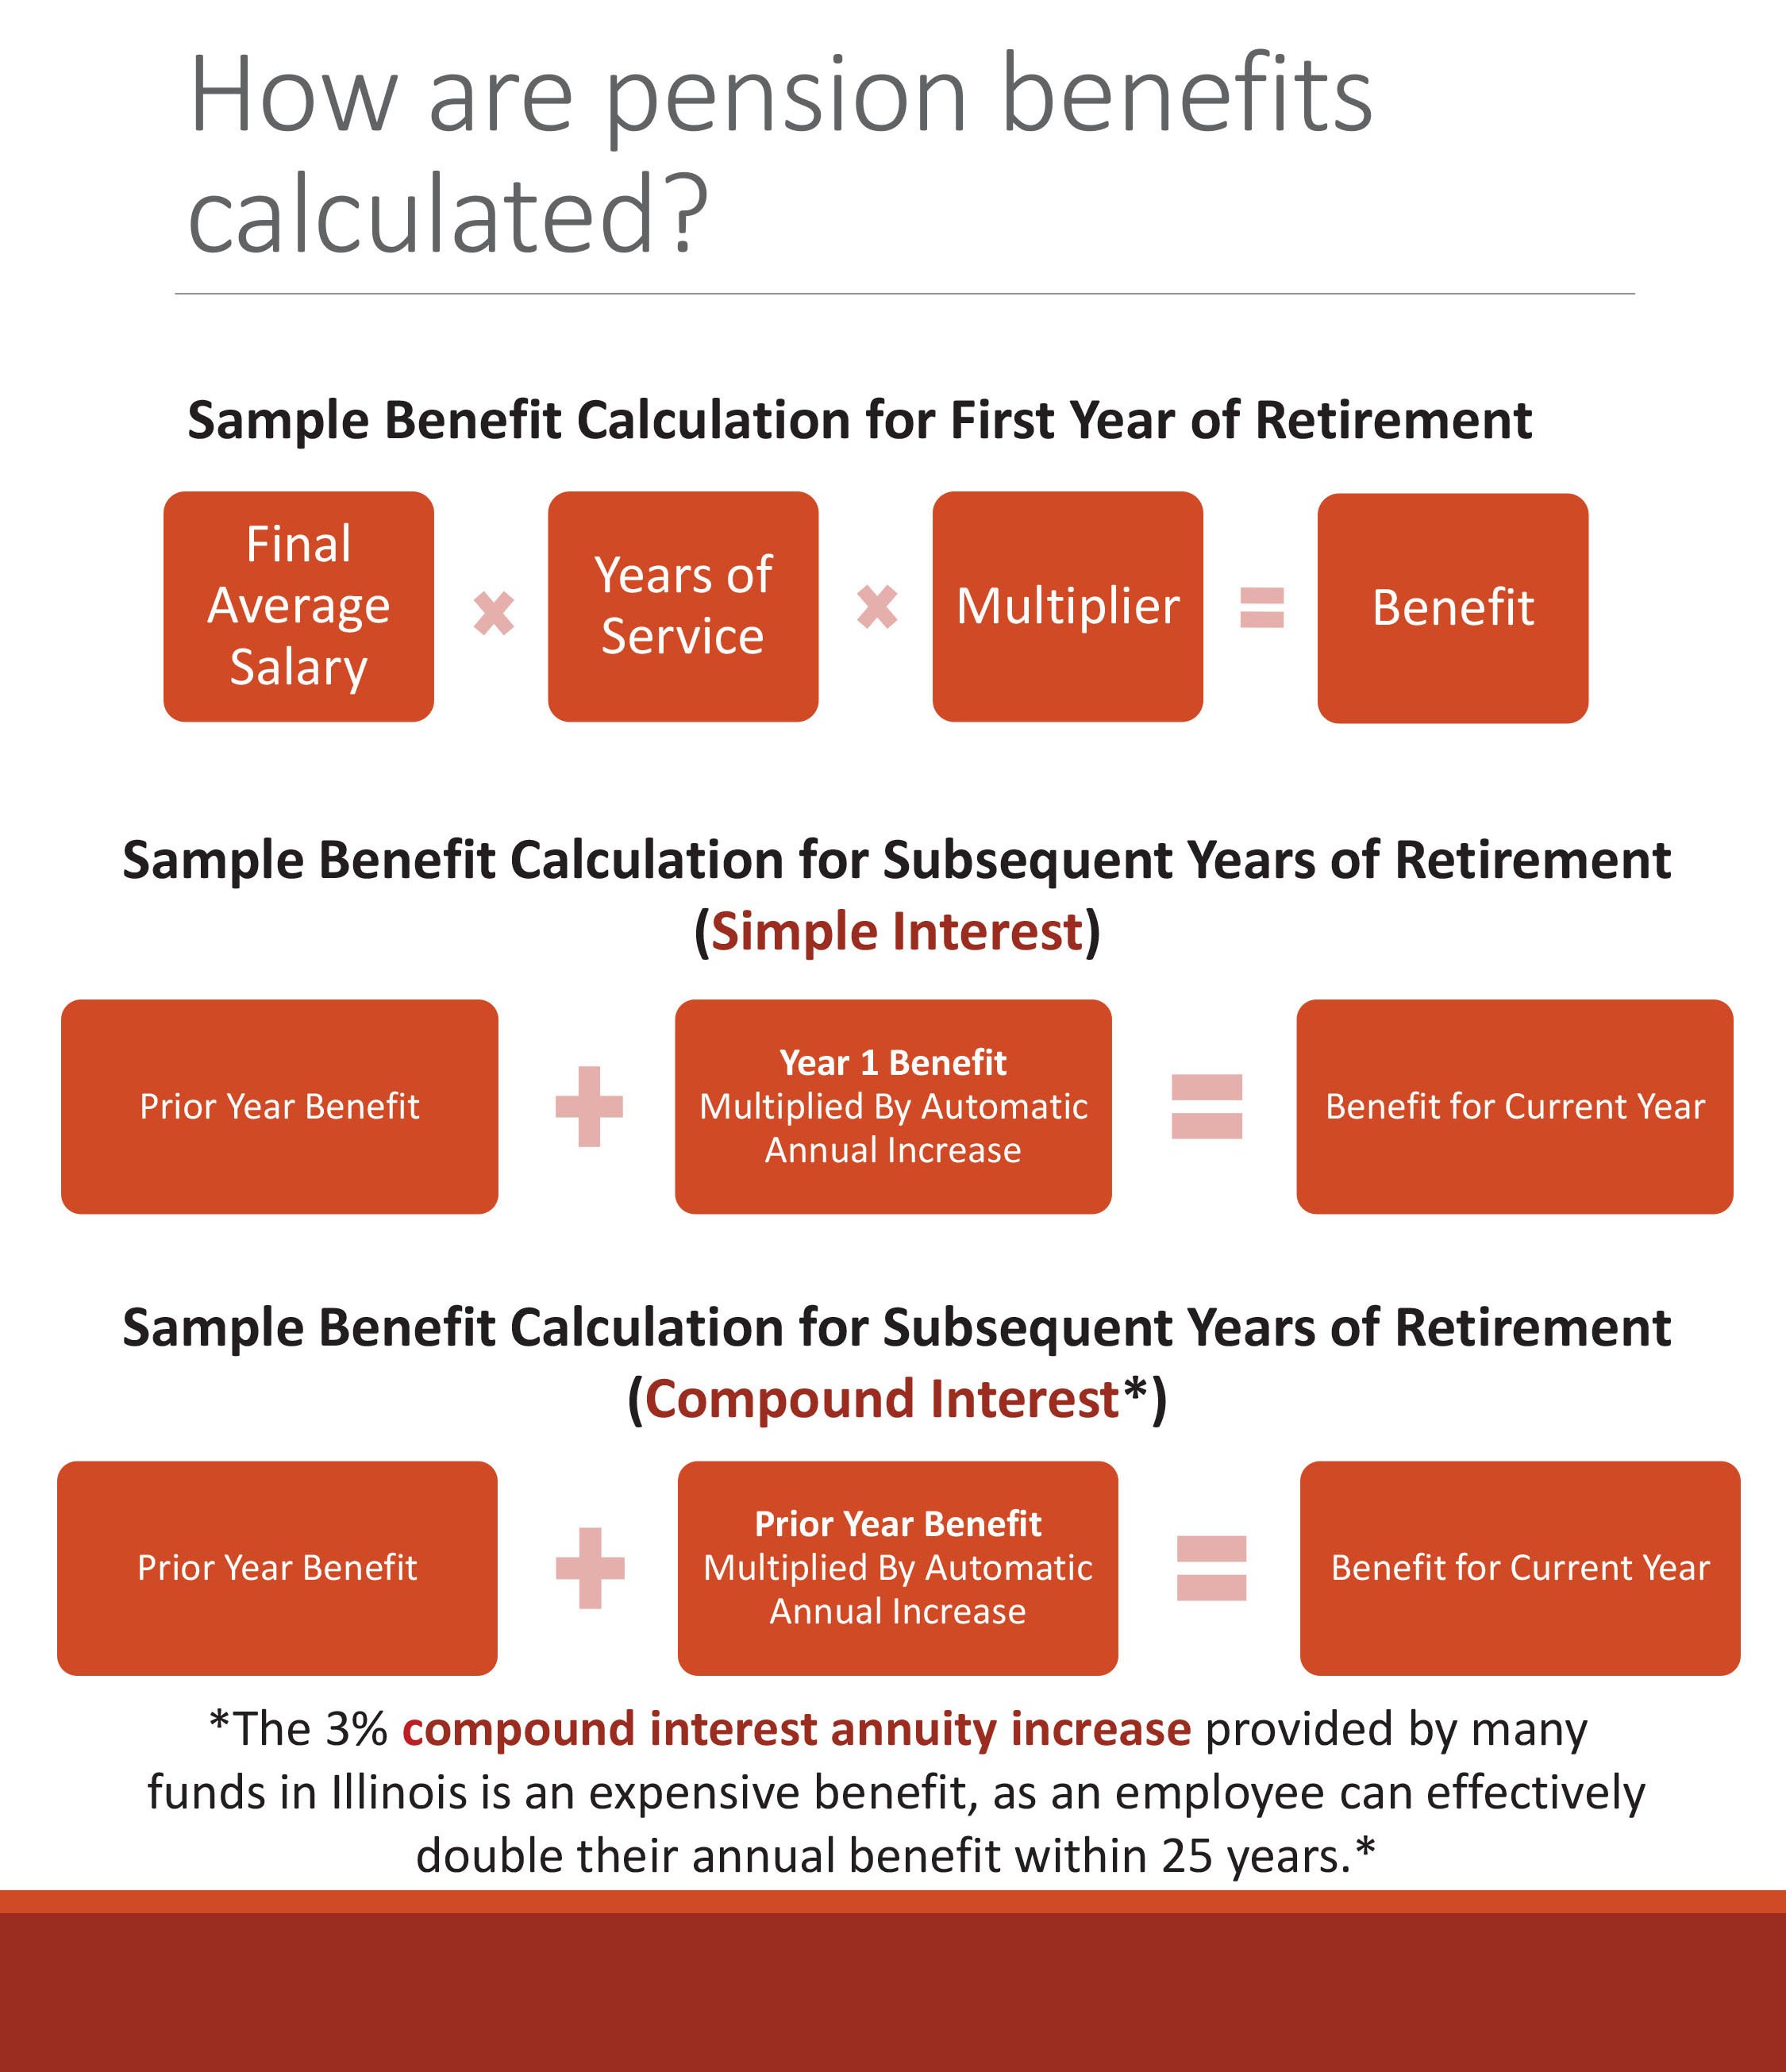 how_are_pension_benefits_calculated.jpg